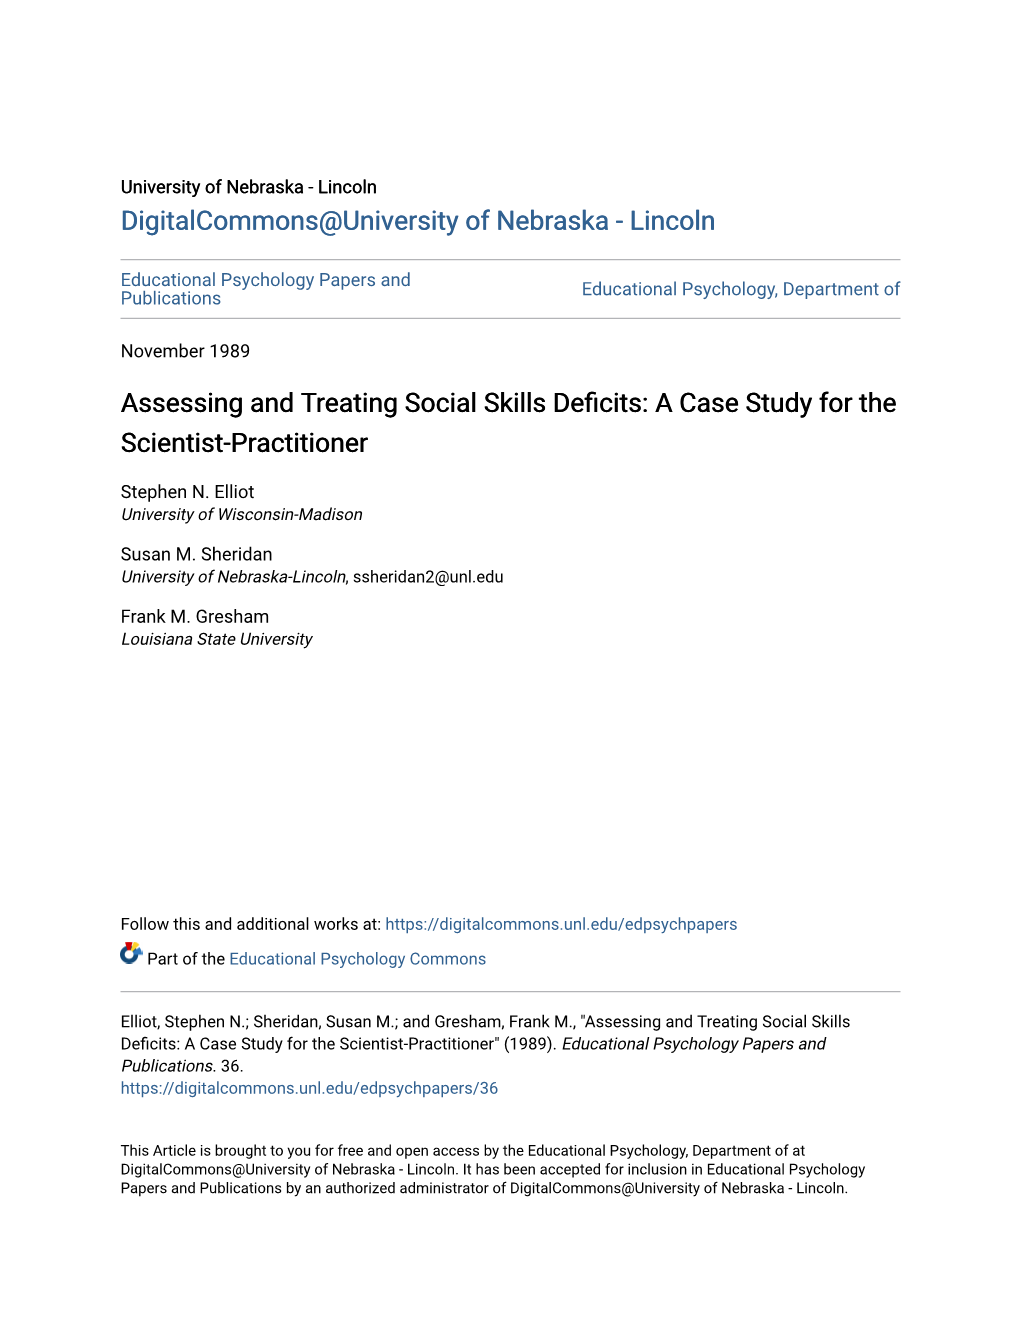 Assessing and Treating Social Skills Deficits: a Case Study for the Scientist-Practitioner